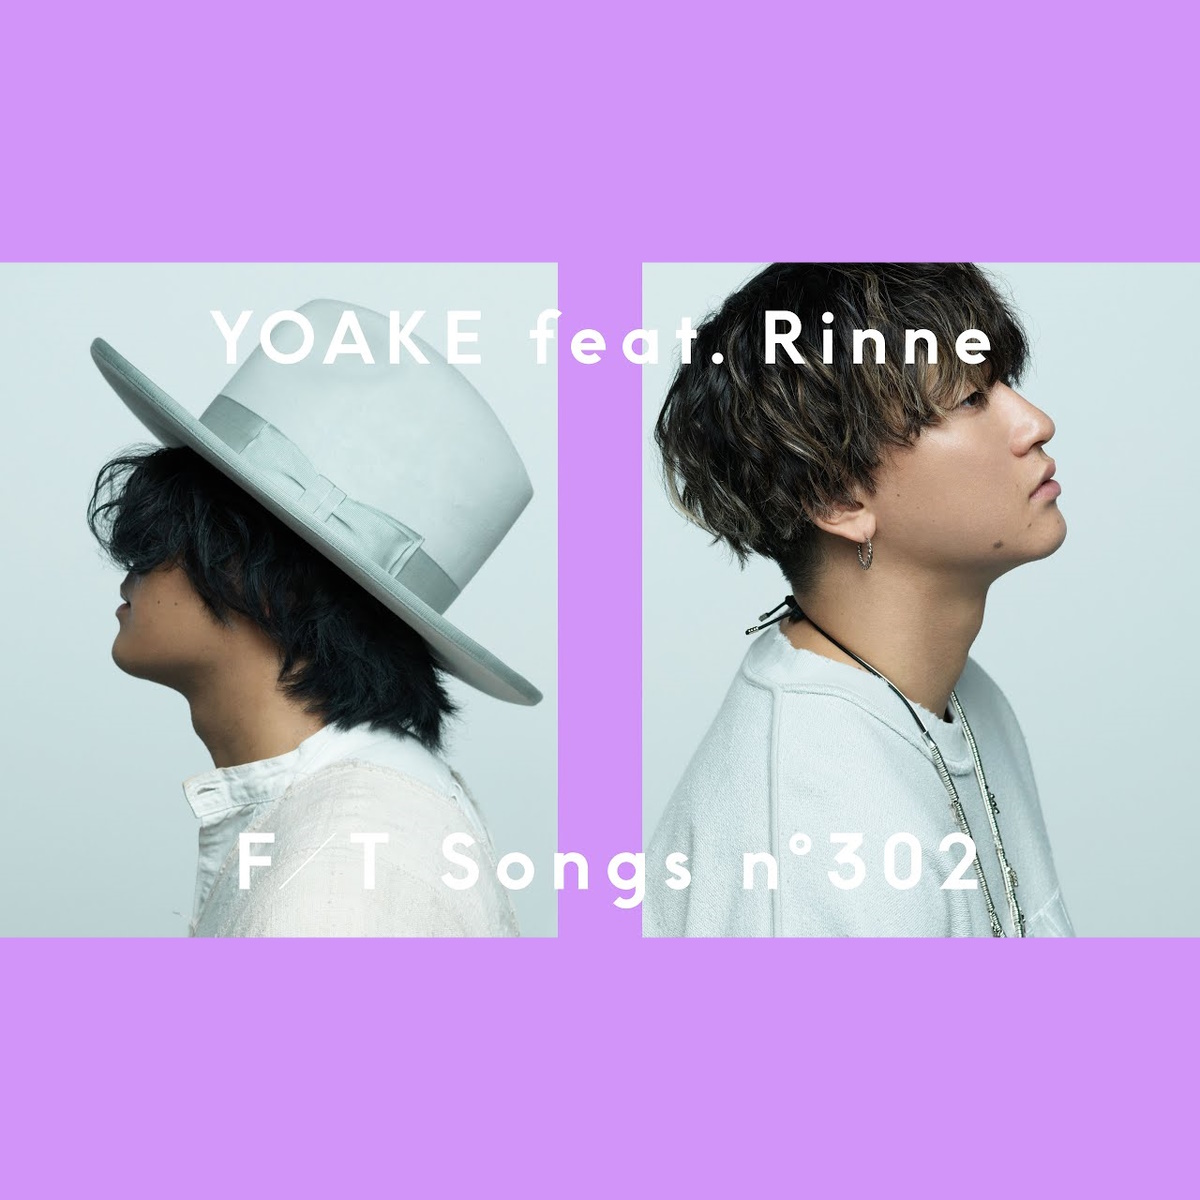 Cover art for『YOAKE - ねぇ feat. Rin音』from the release『Nee feat. Rinne